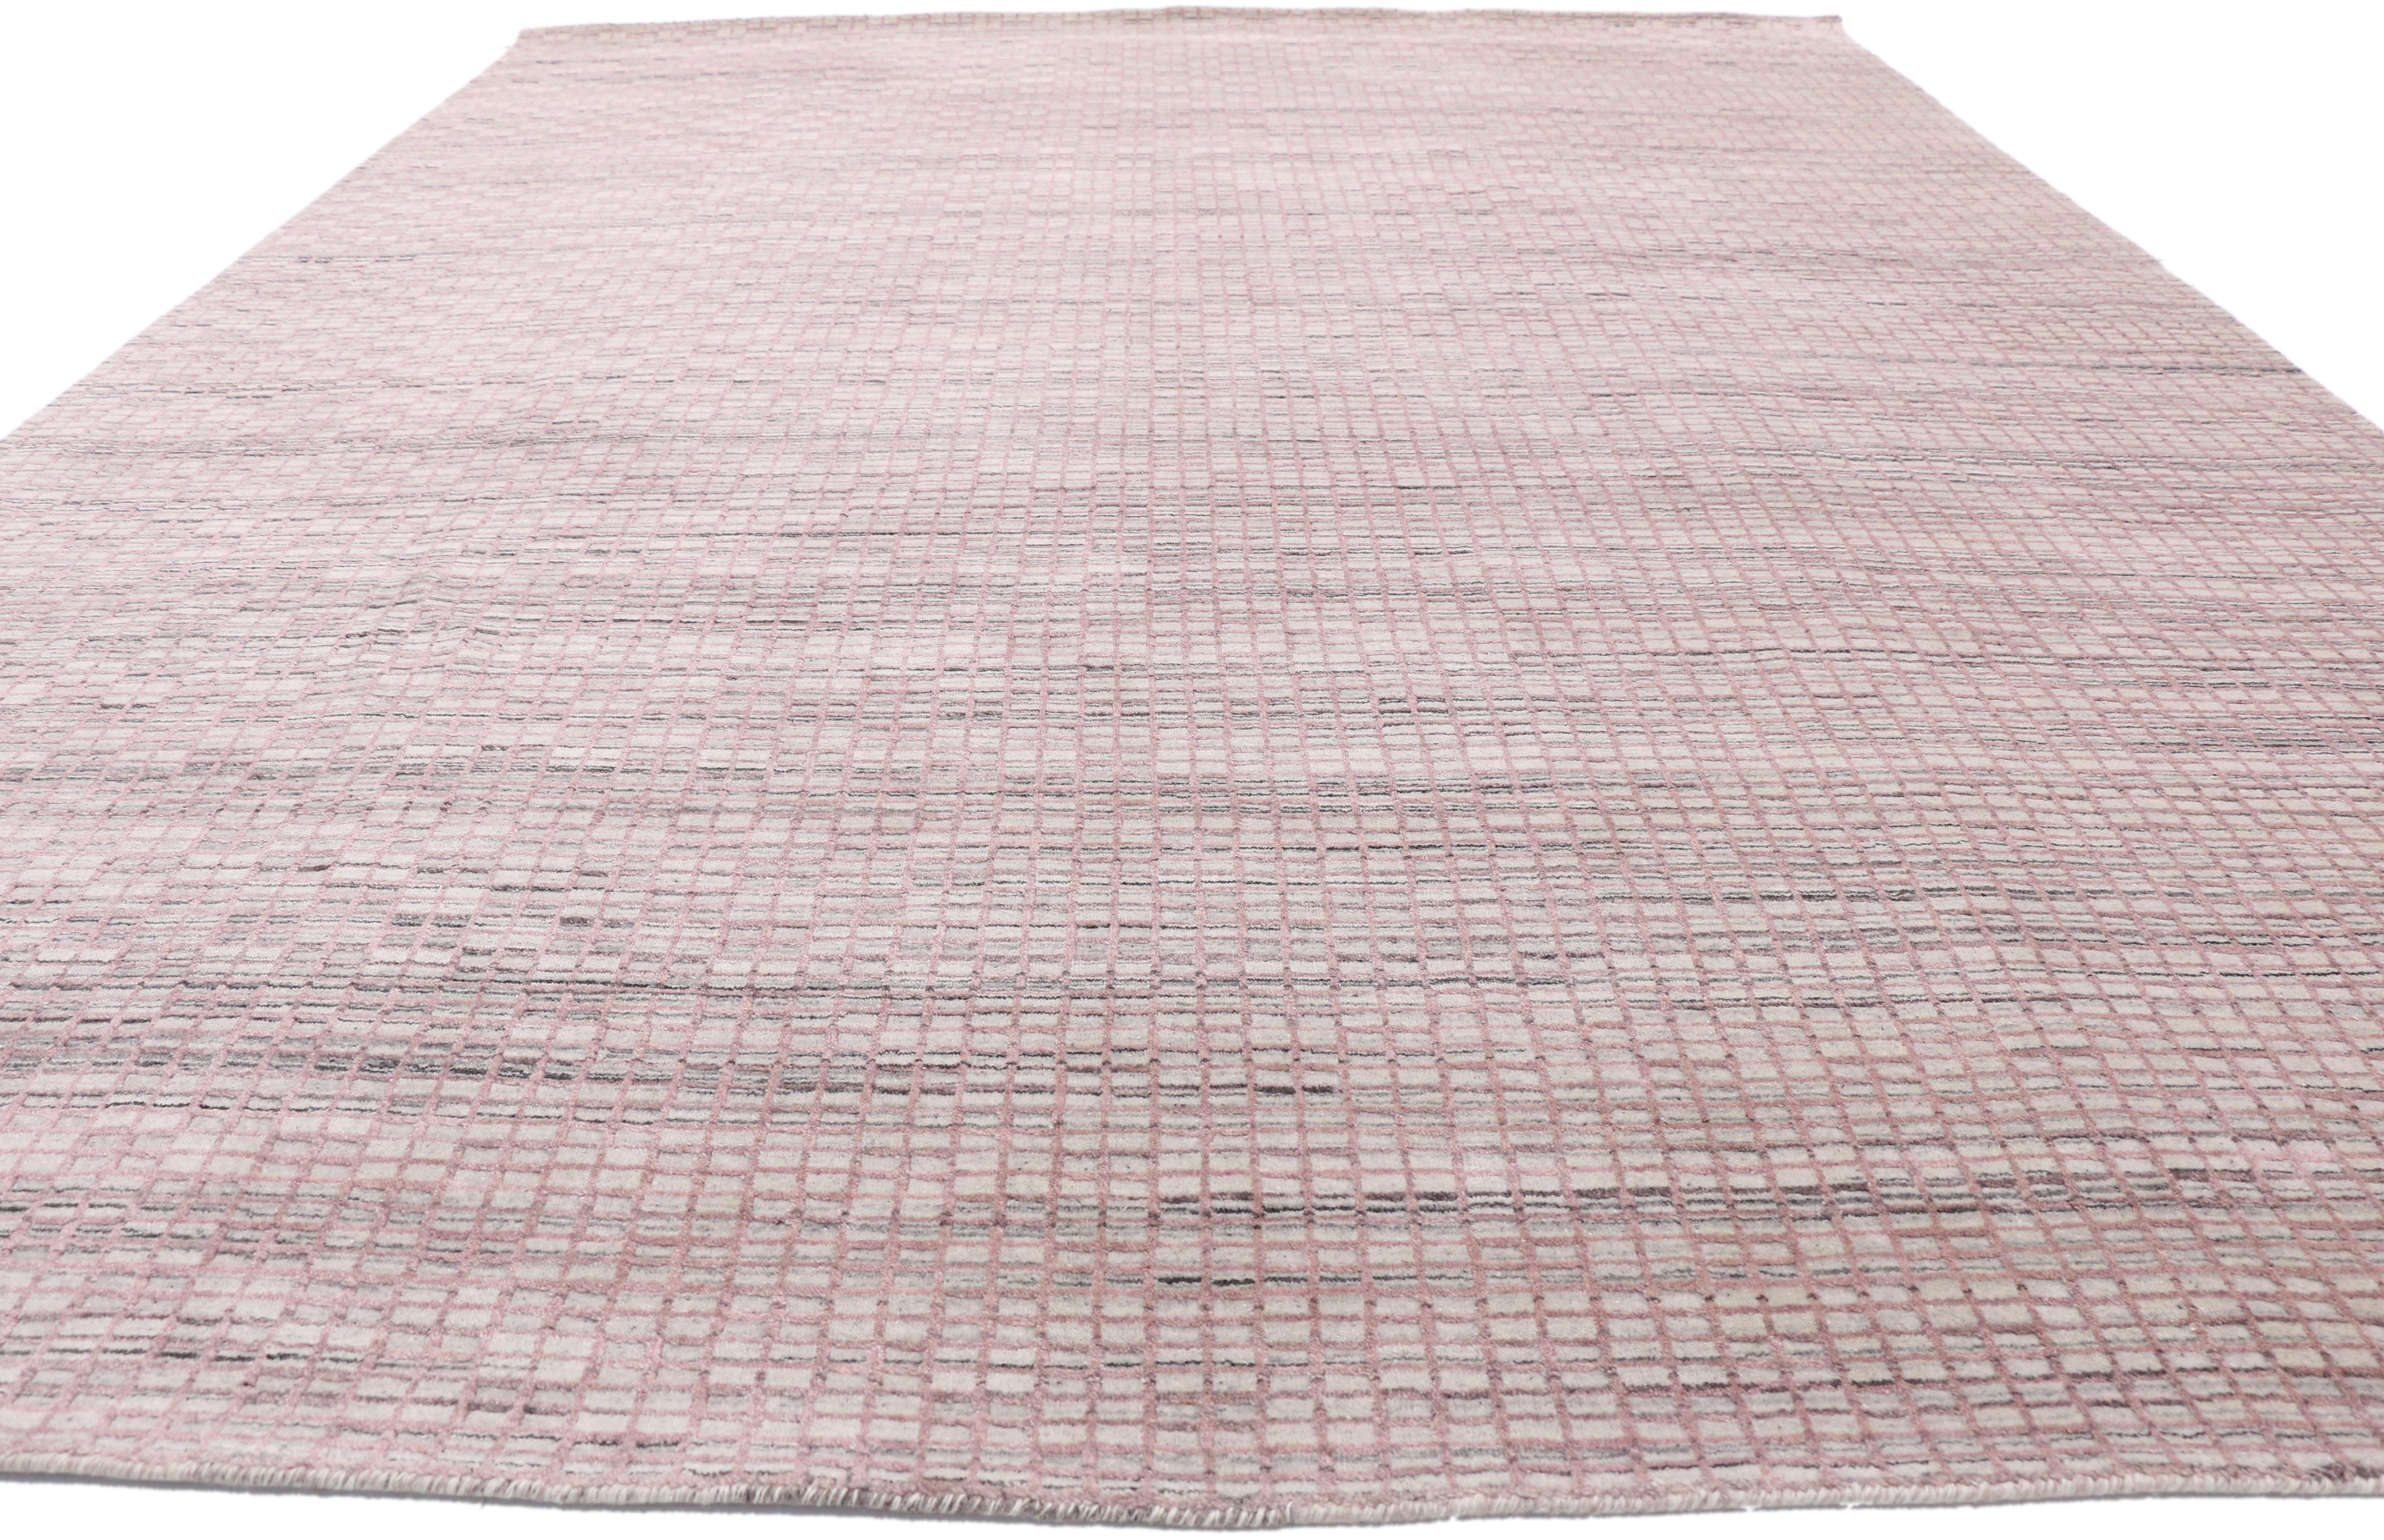 transitional area rugs